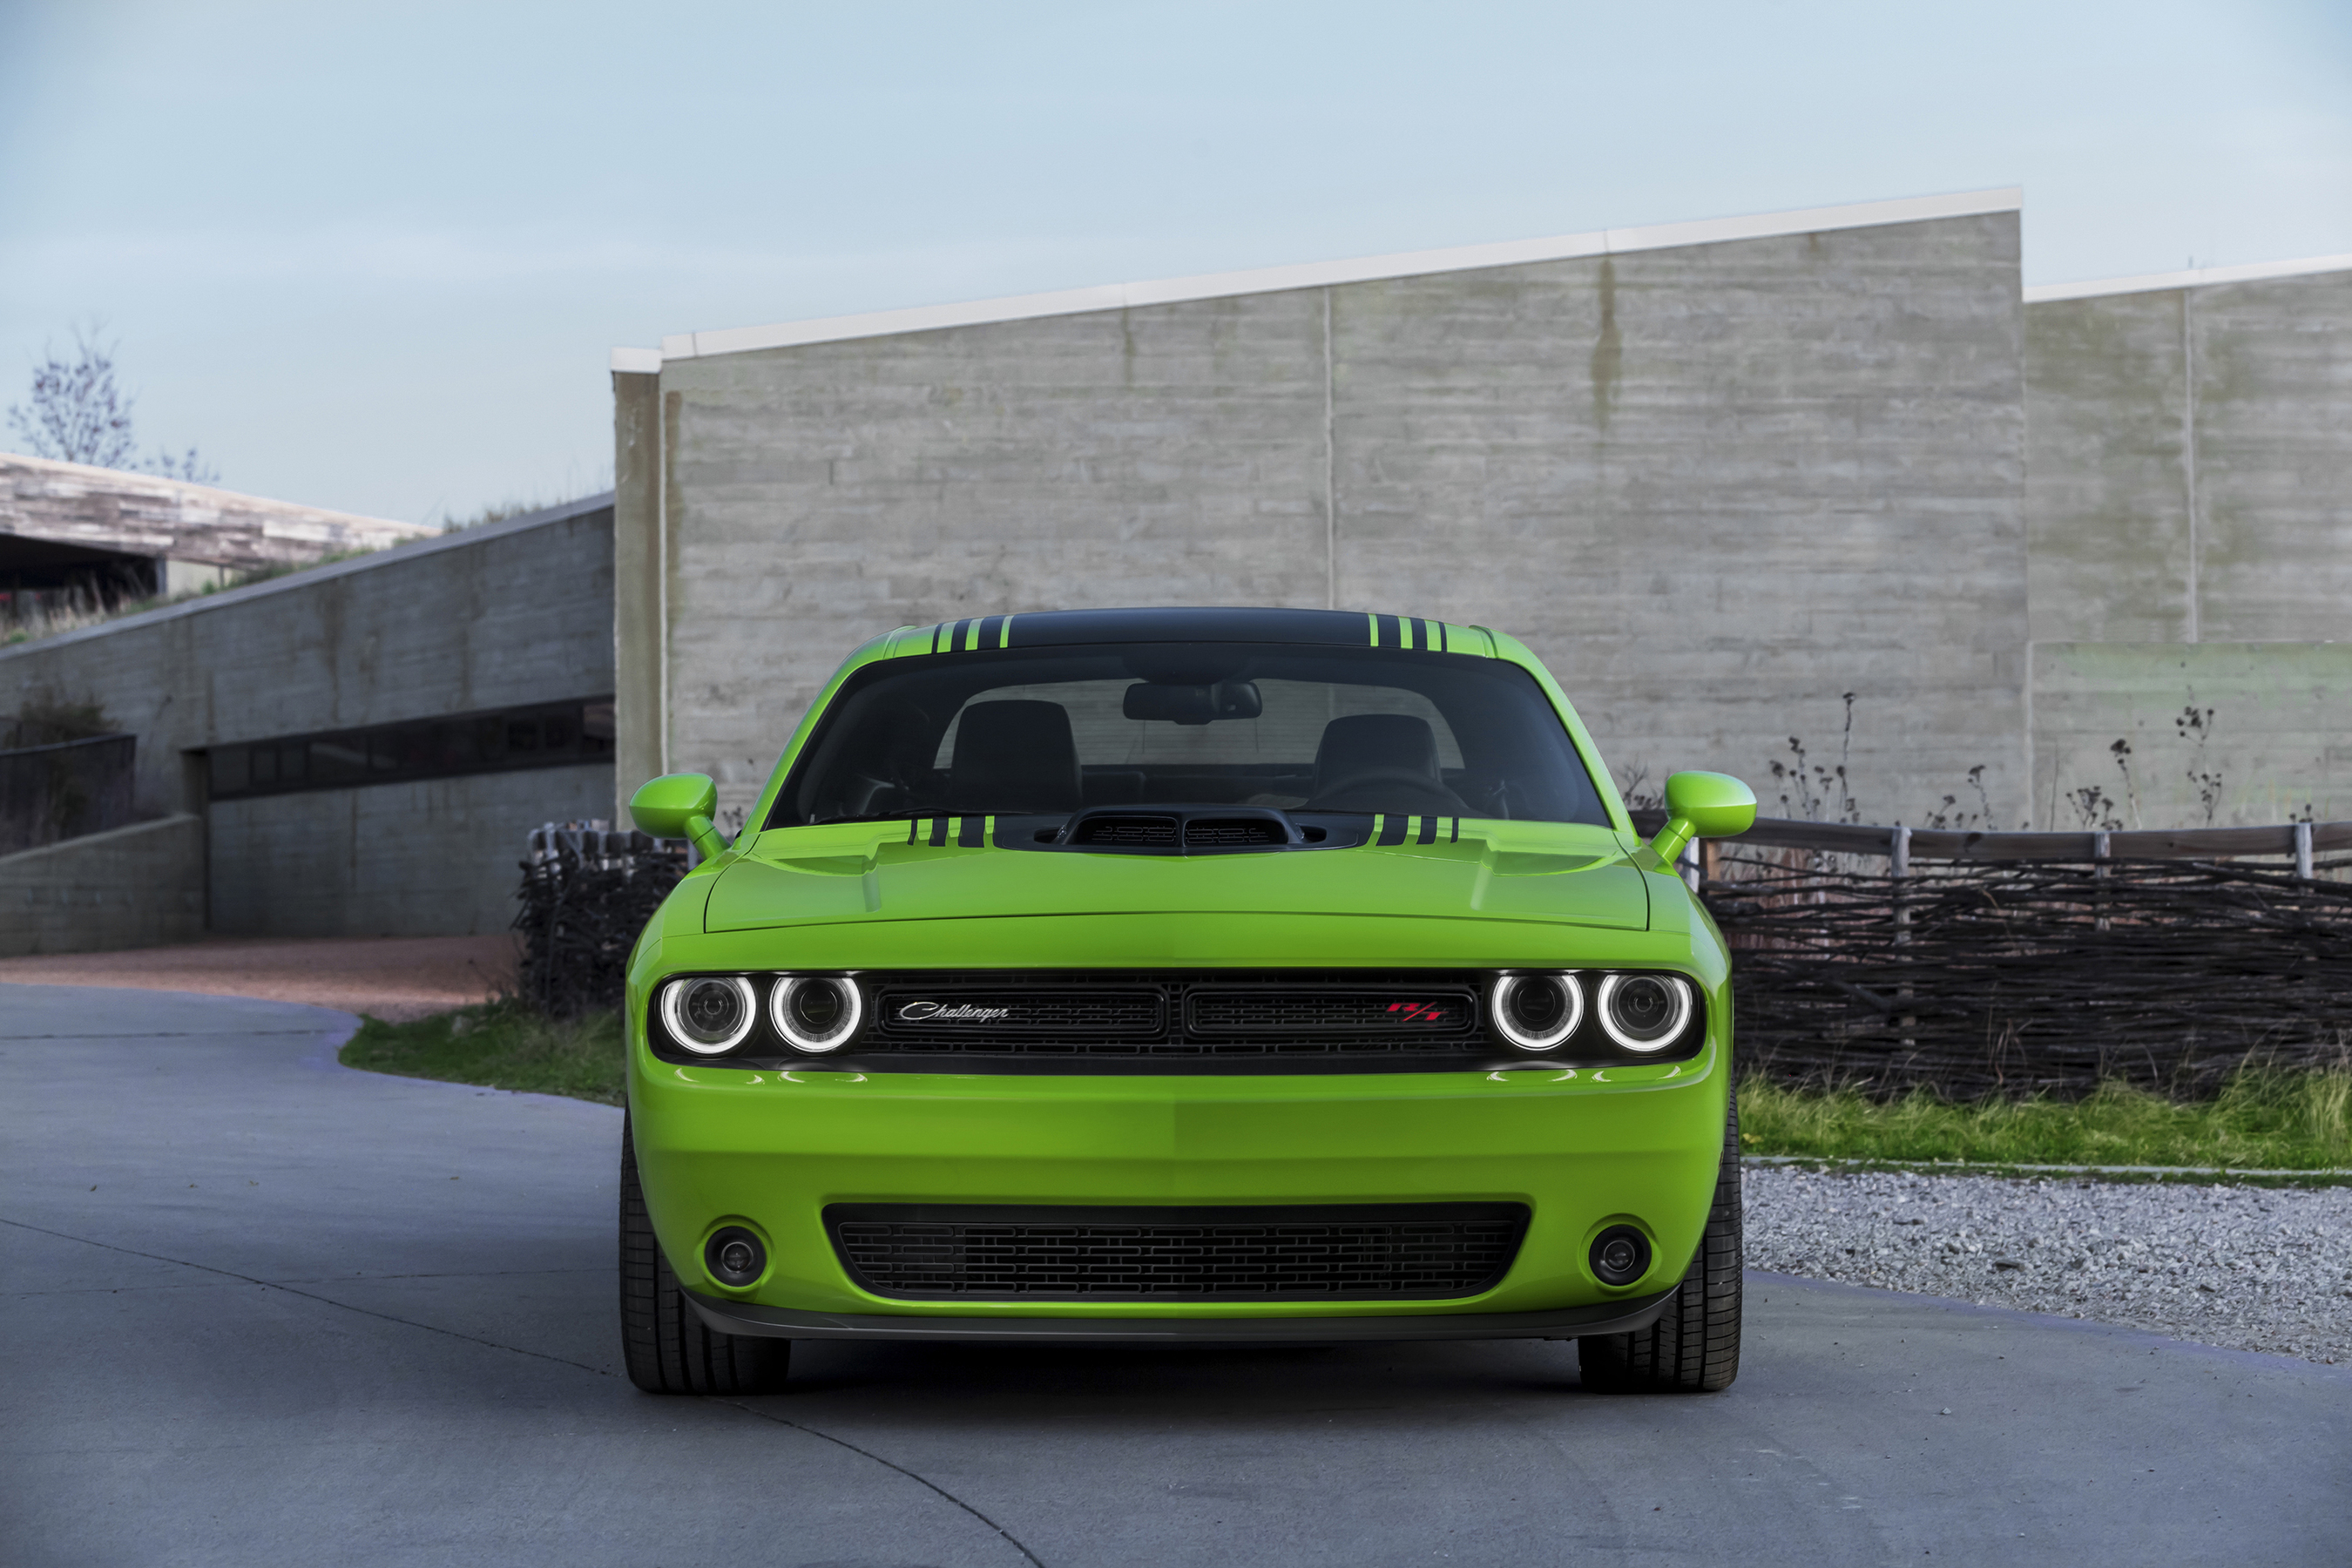 100 Mopar accessories and performance parts available for 2015 Dodge Challenger and Charger (PRNewsFoto/Chrysler Group LLC)